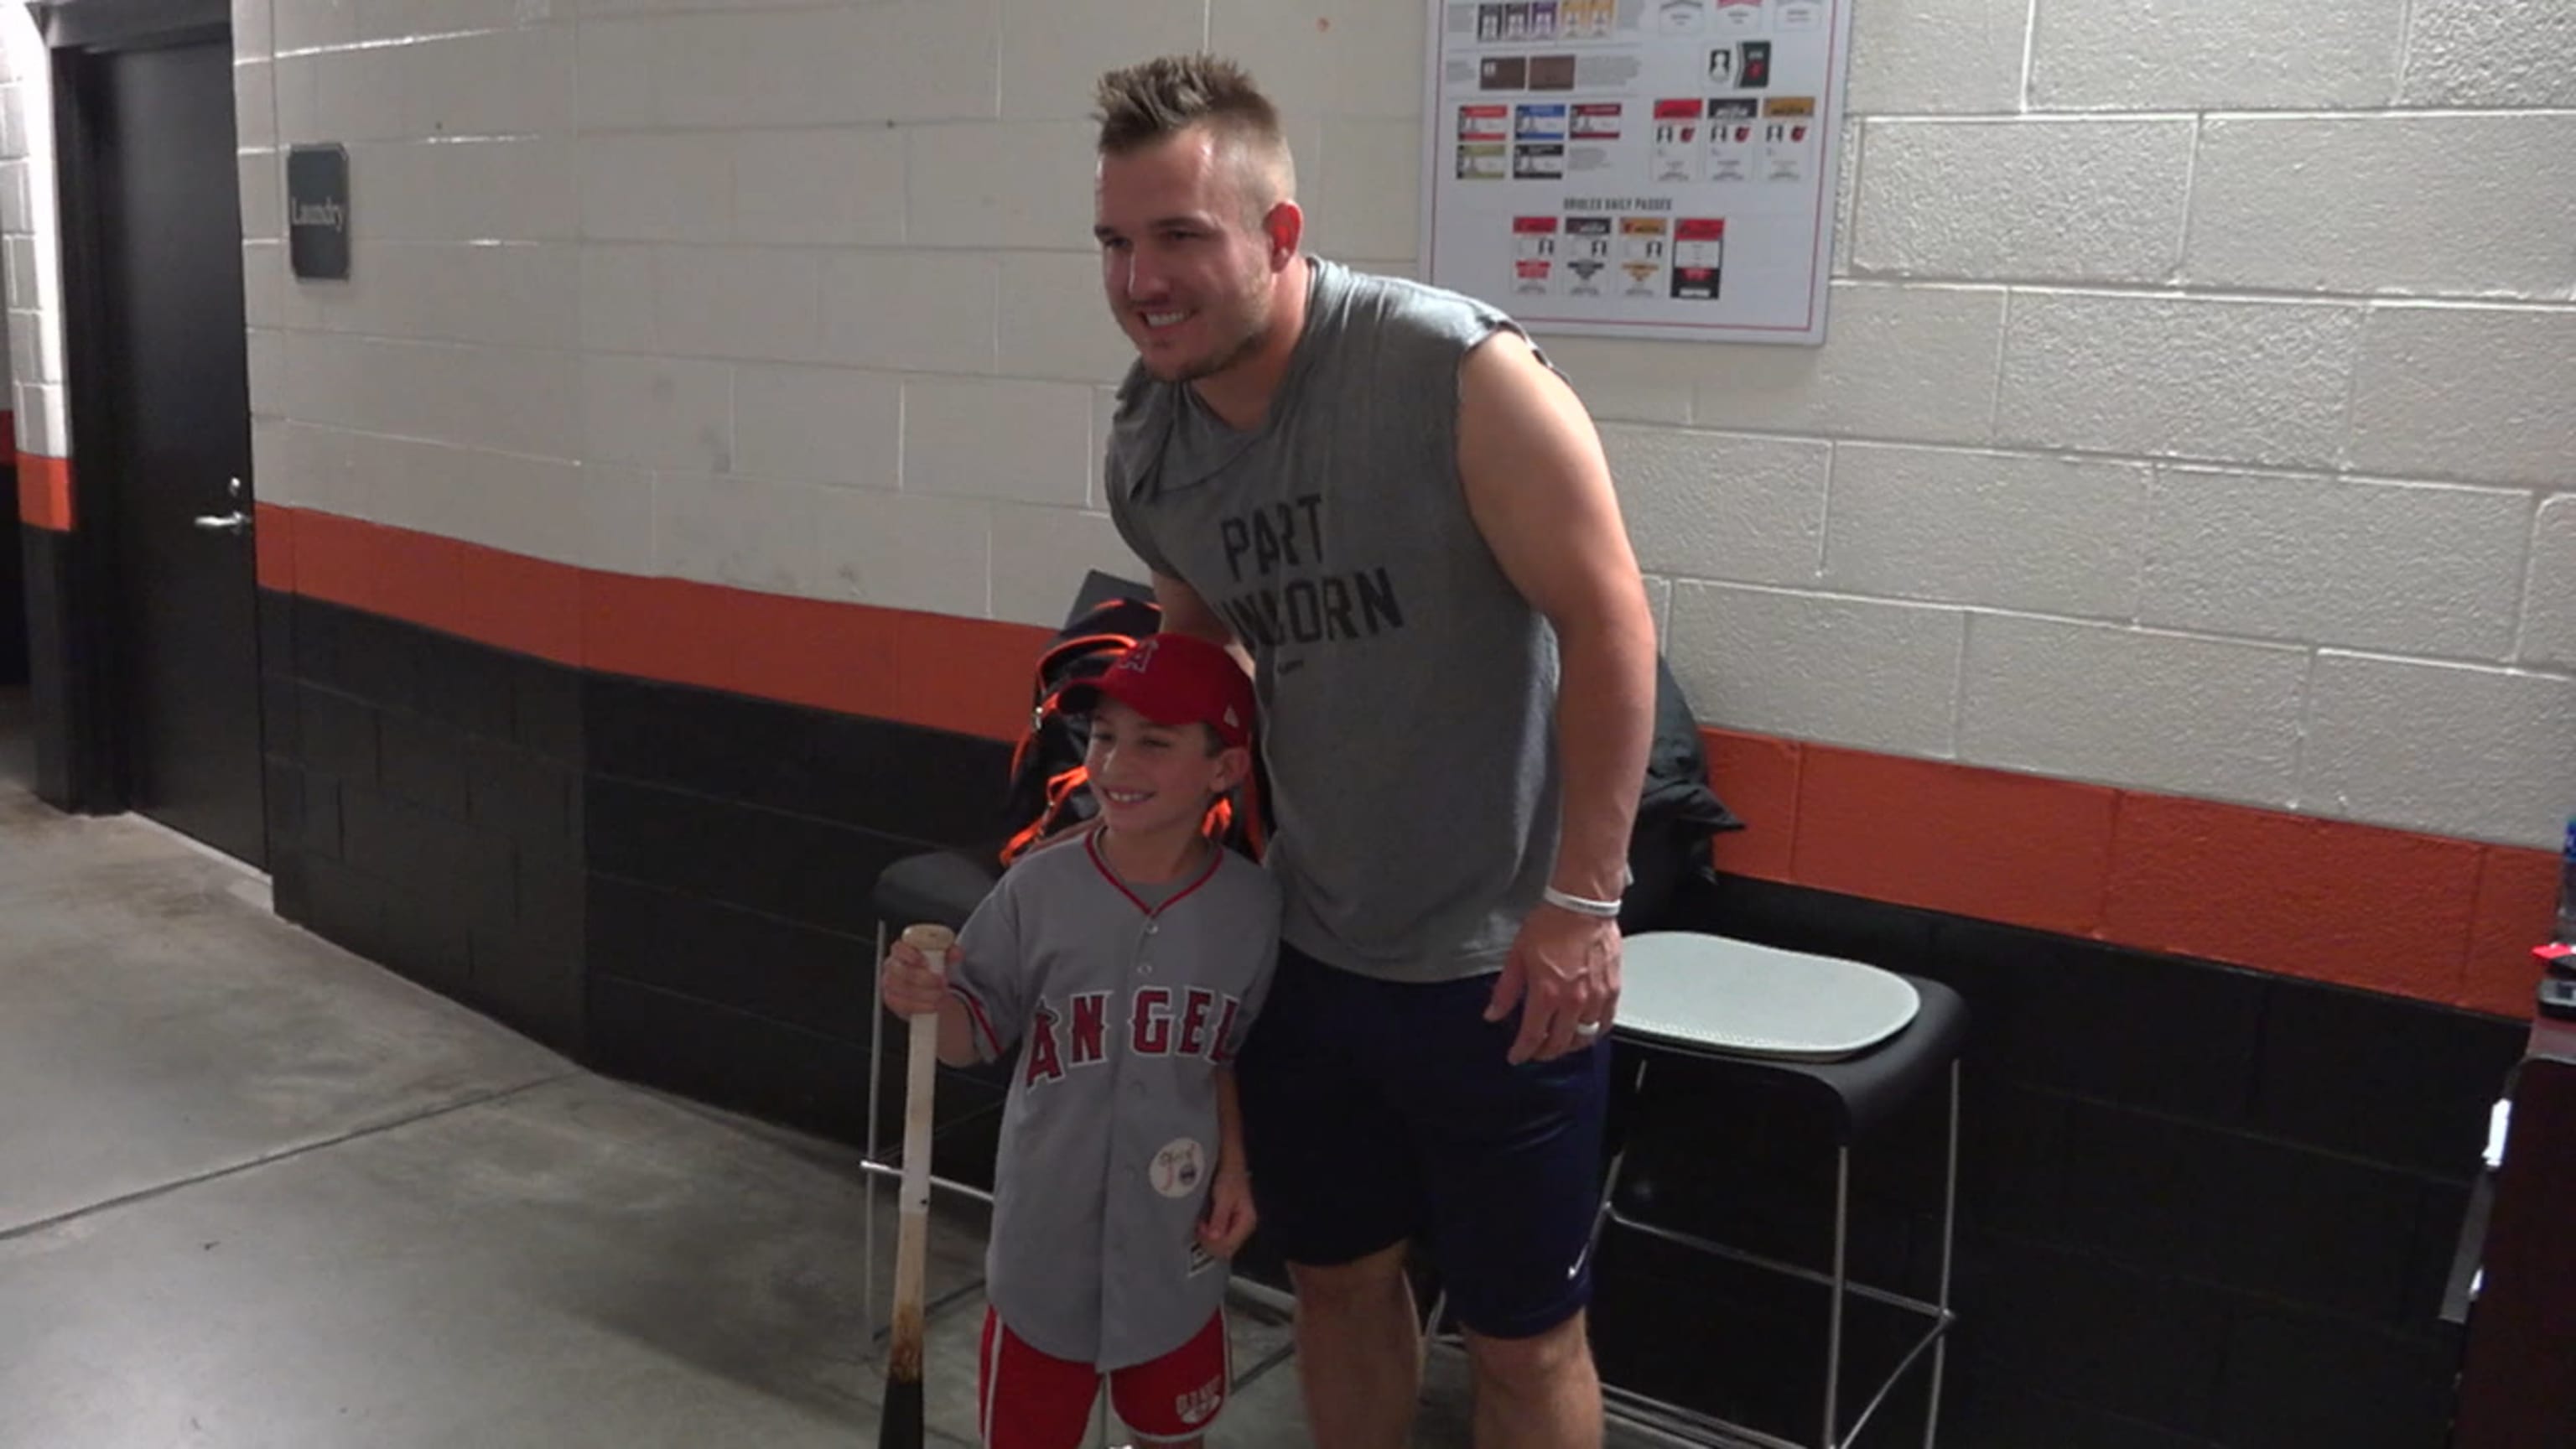 SportsCenter - Mike Trout and his father, Jeff.